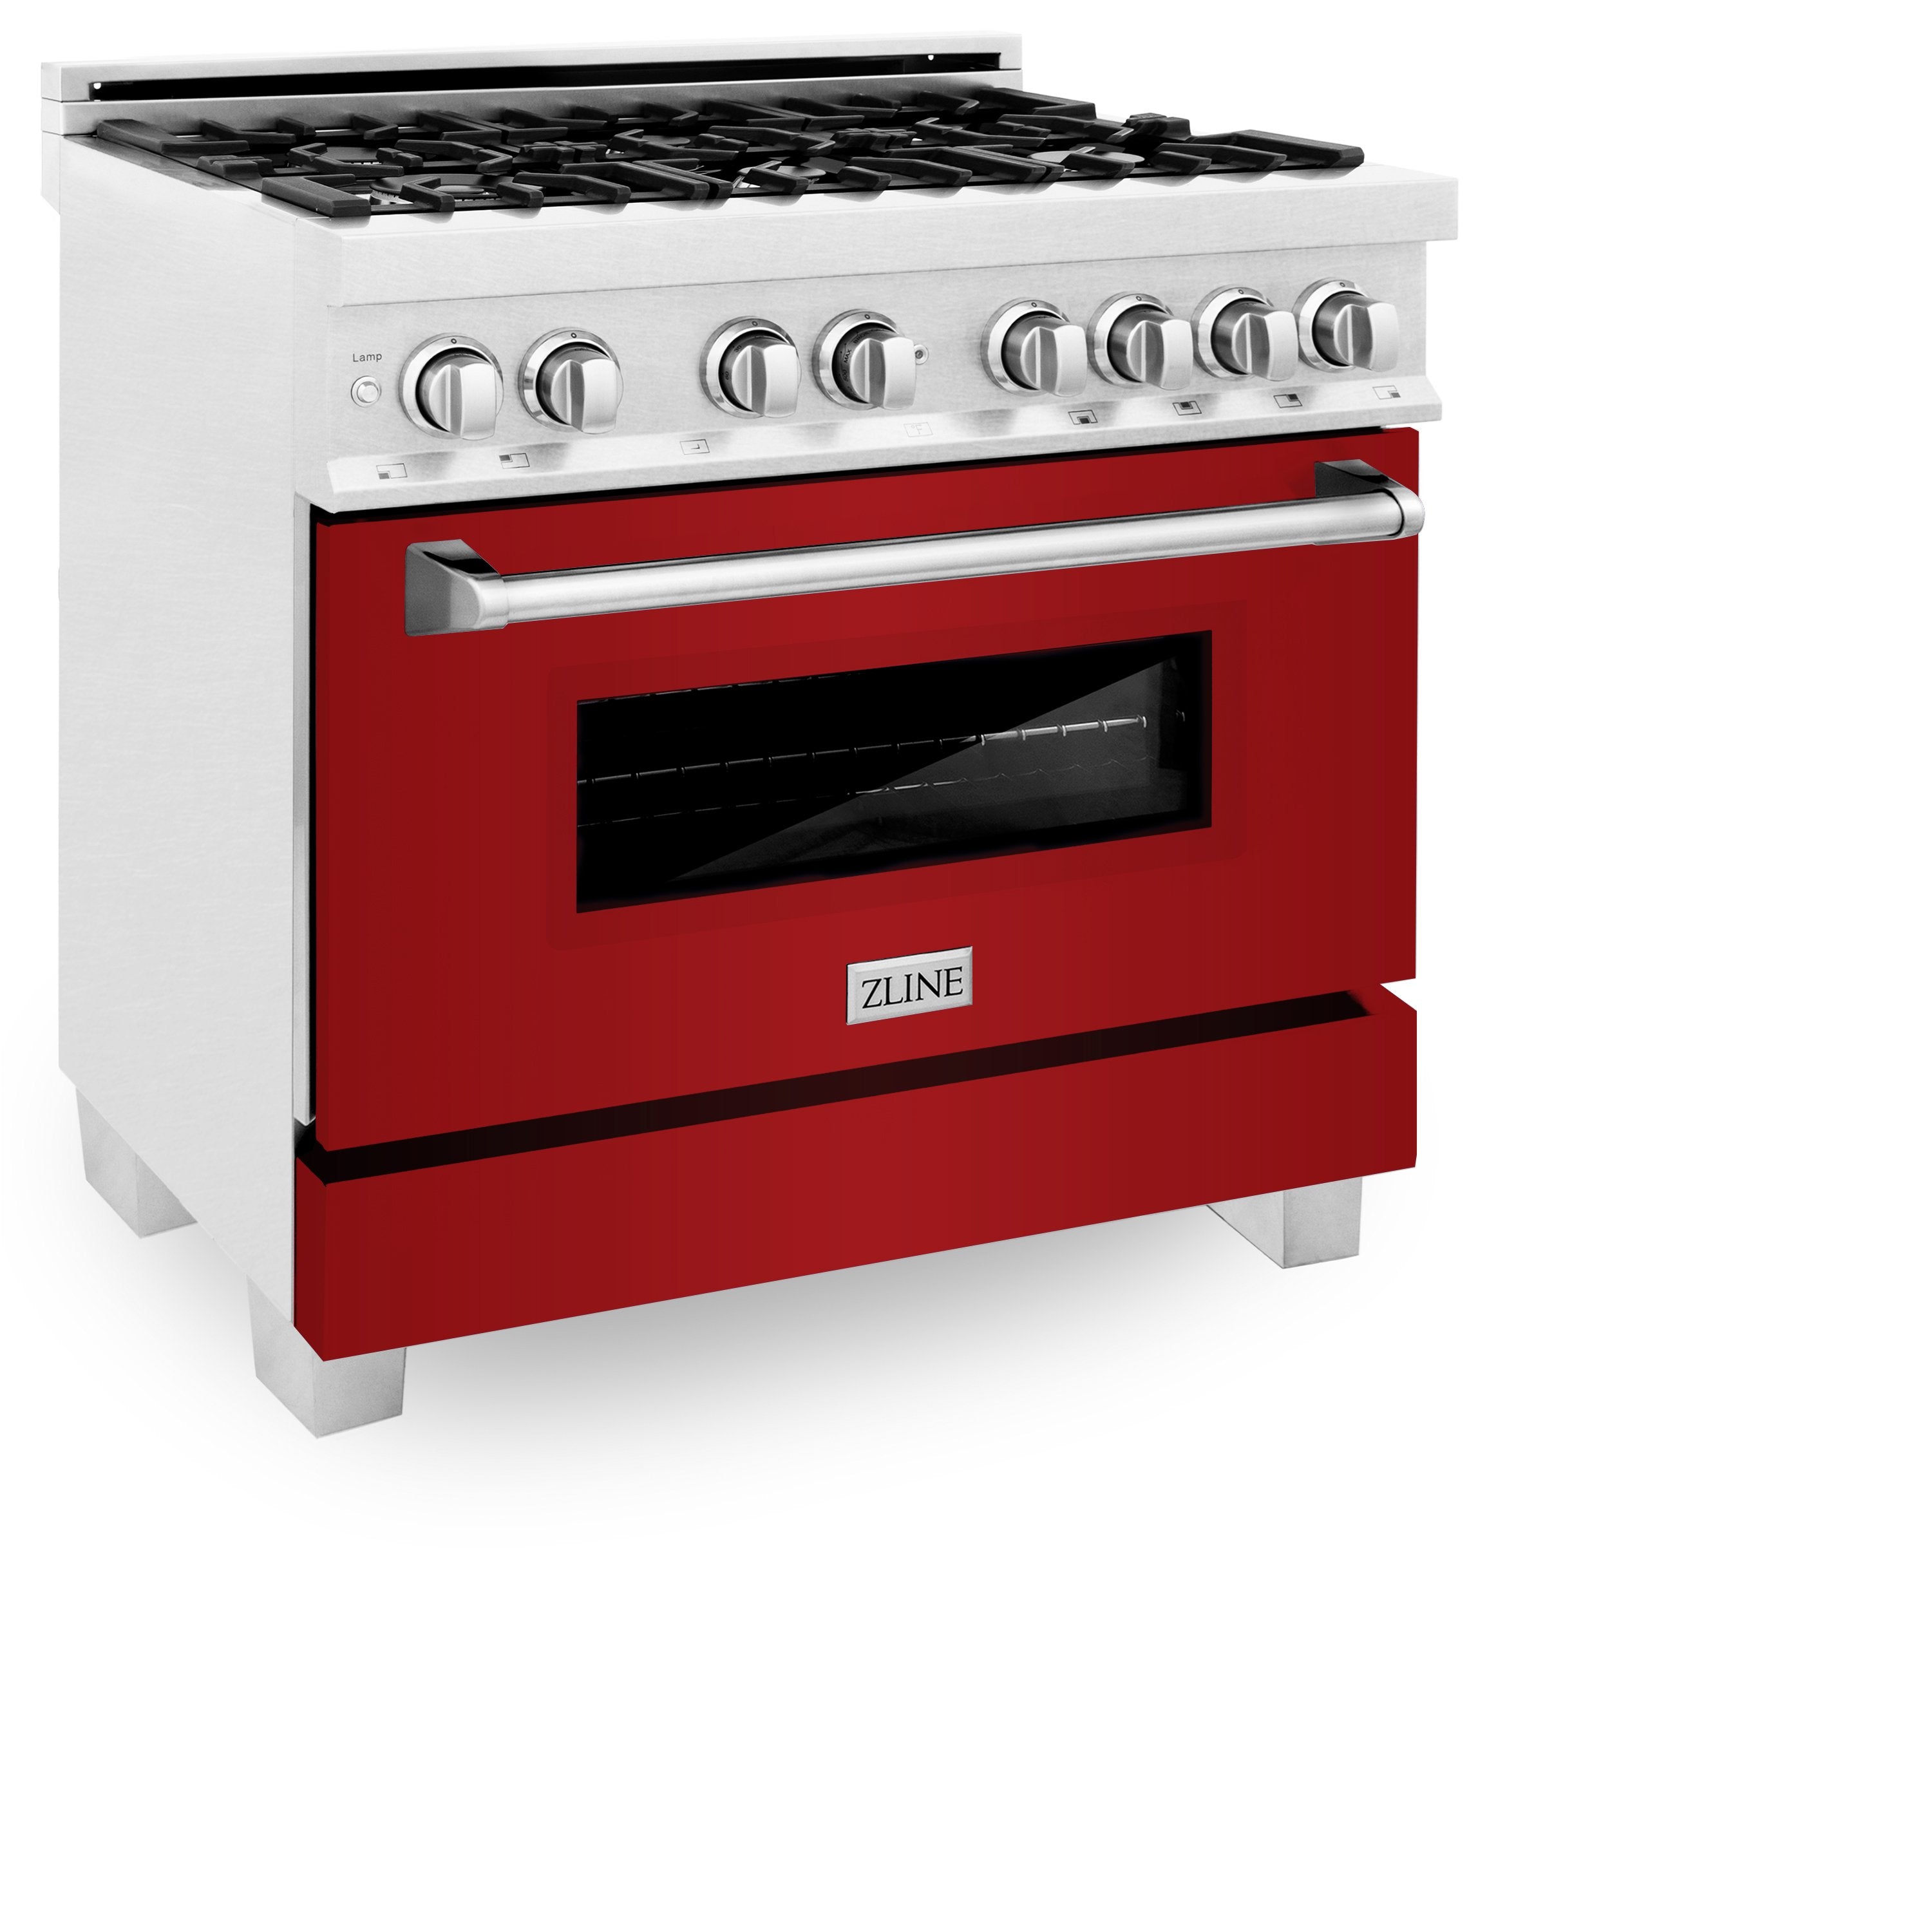 ZLINE 36" Professional Dual Fuel Range in DuraSnow® Stainless Steel with Color Door Finishes